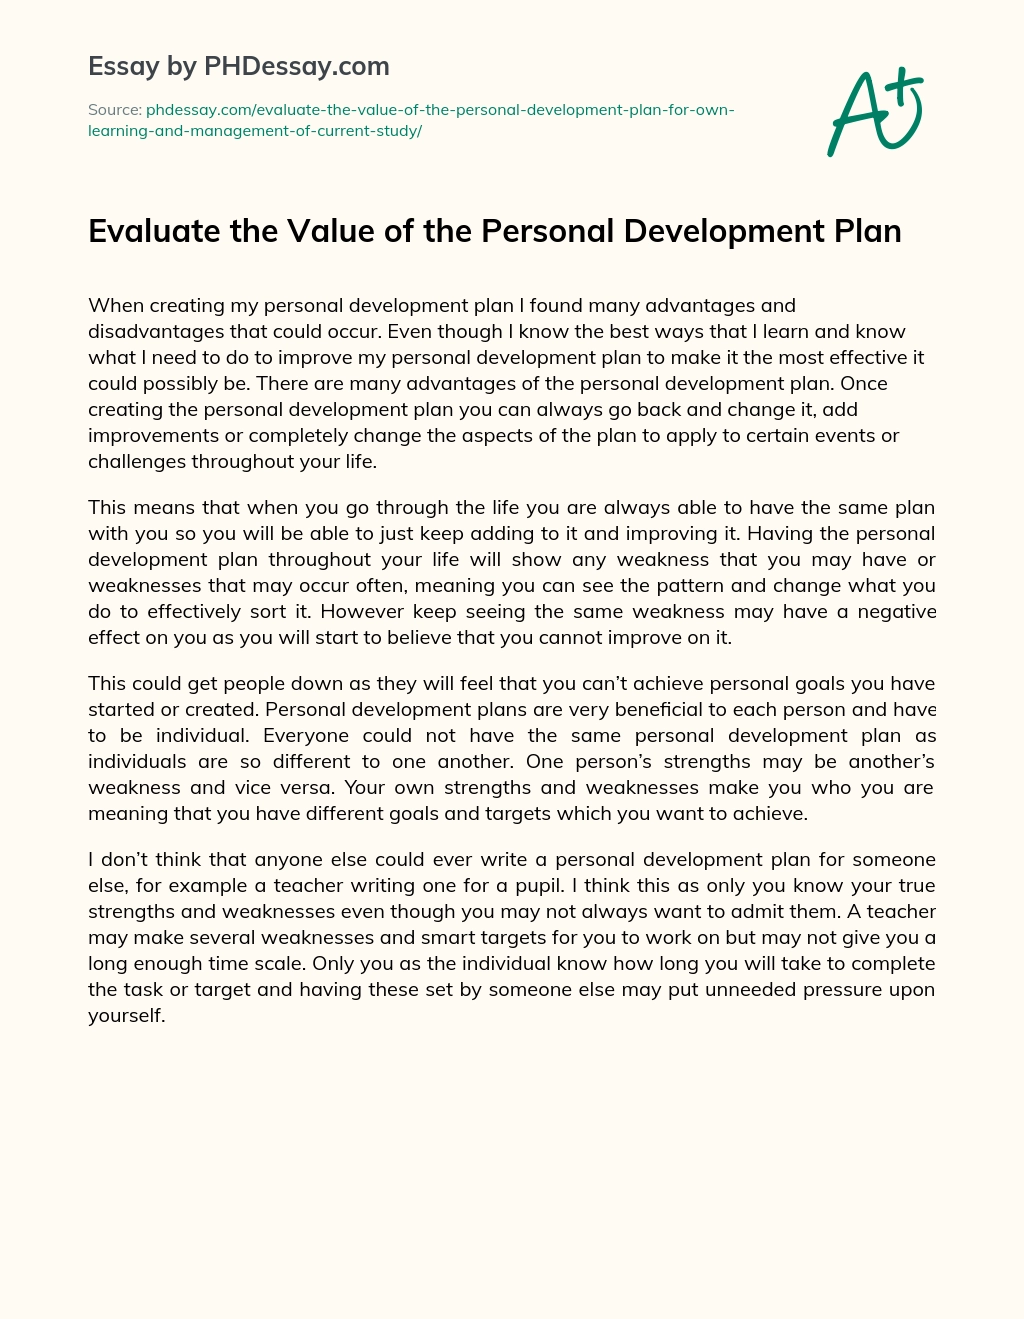 Evaluate the Value of the Personal Development Plan essay